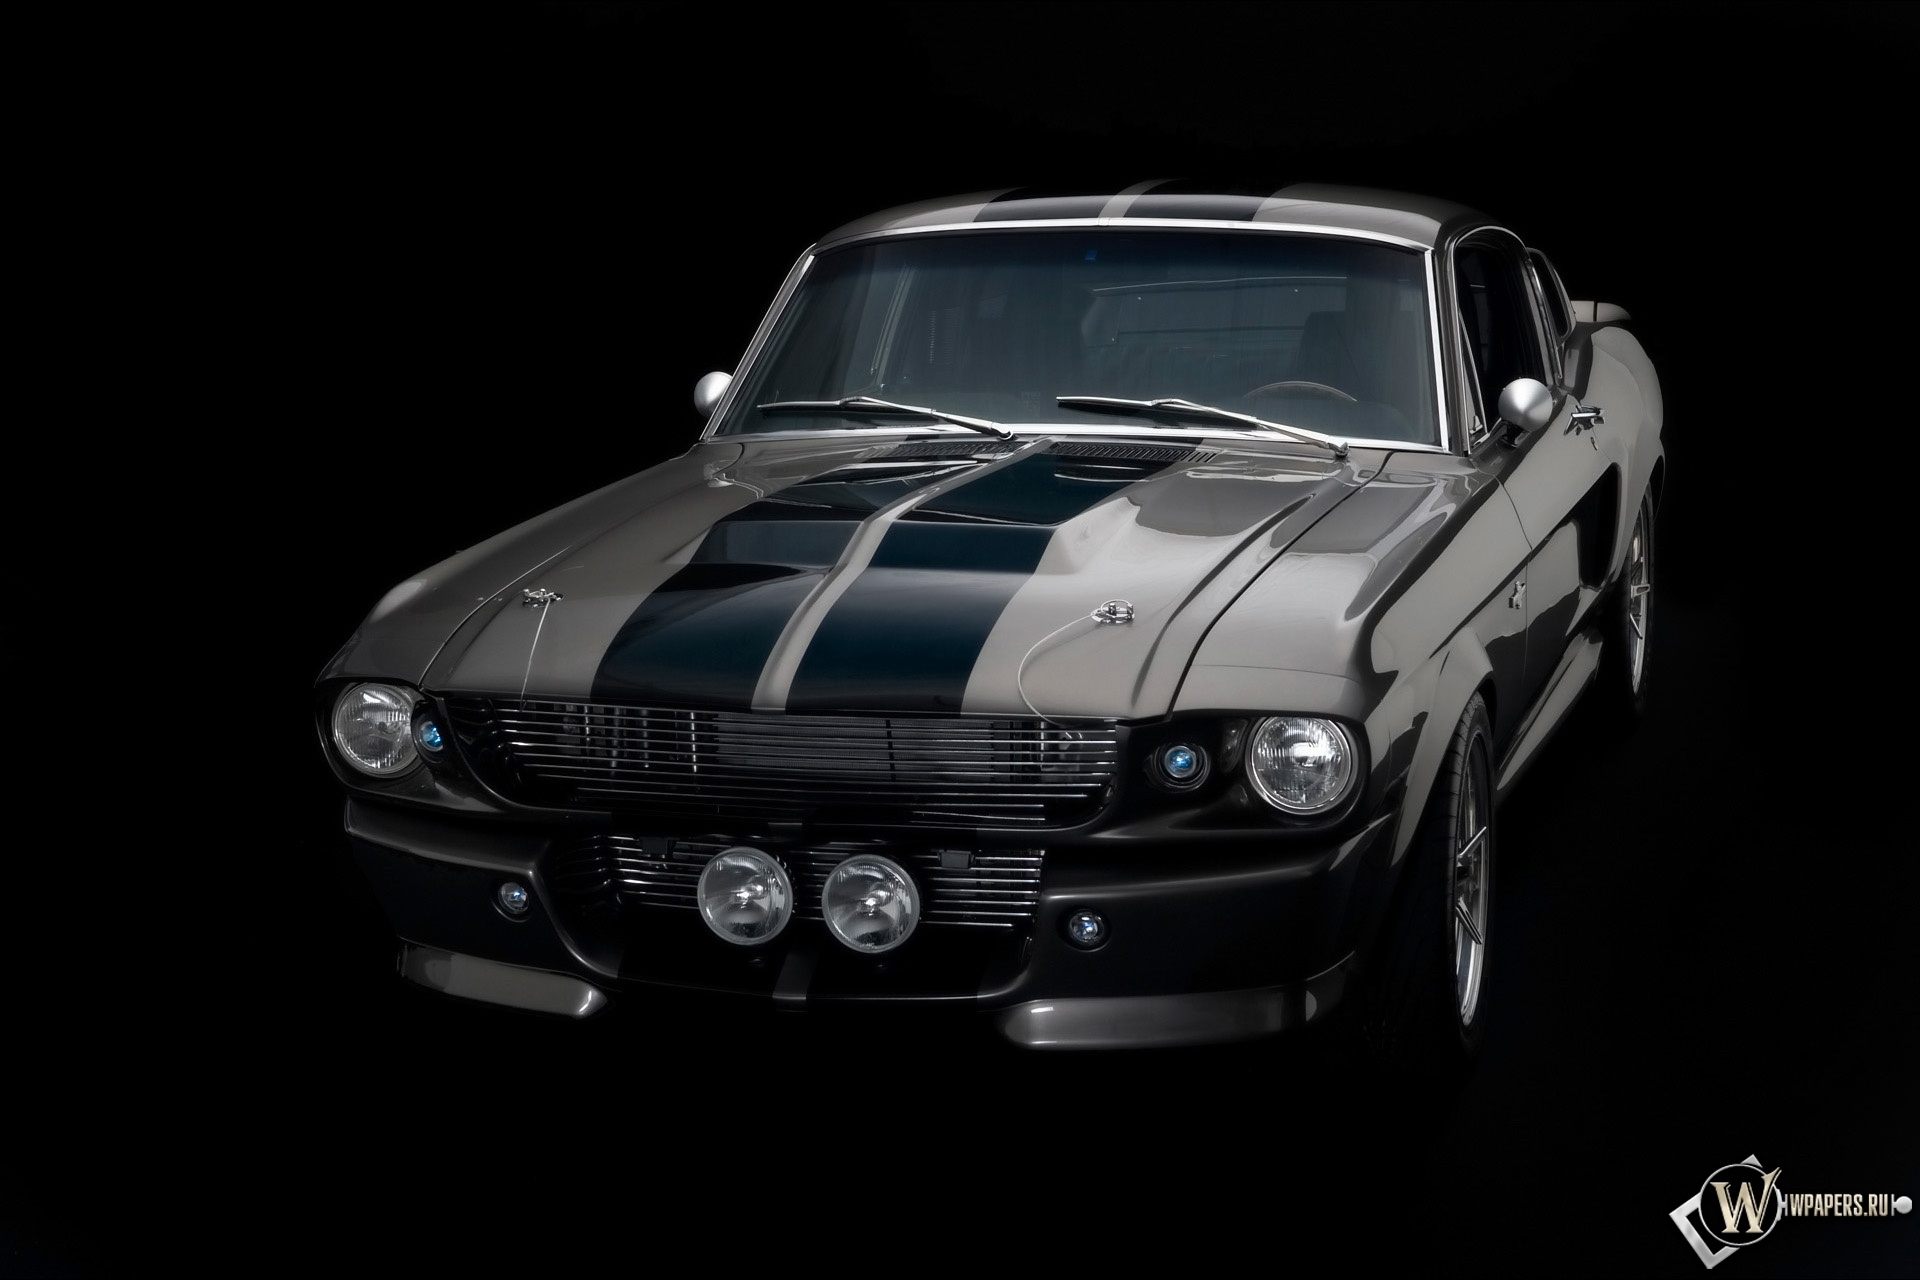 1967-Mustang-Fastback-Gone-in-60-Seconds-Eleanor-Section 1920x1280